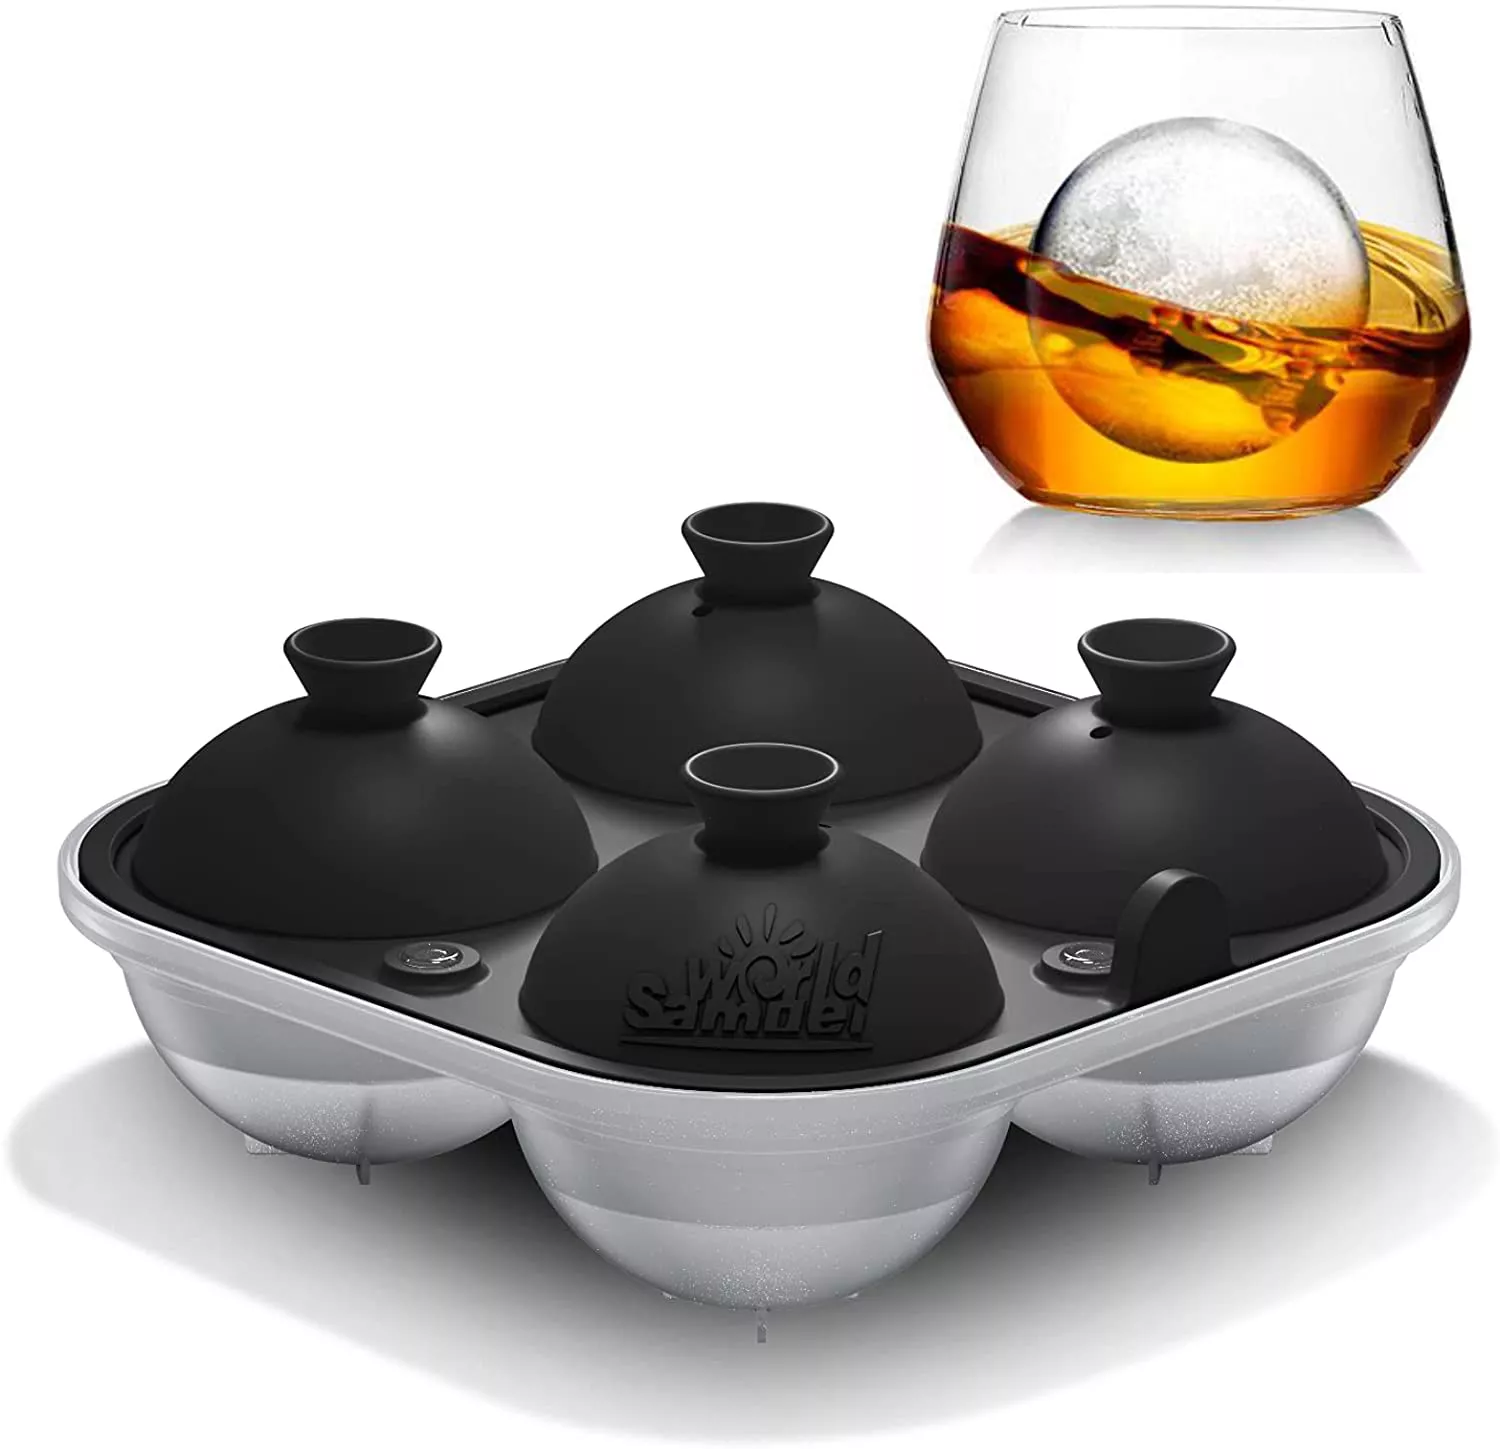 Samuelworld Large Sphere Ice Tray - 2.5 inches Ice Mold for Cocktail and Scotch